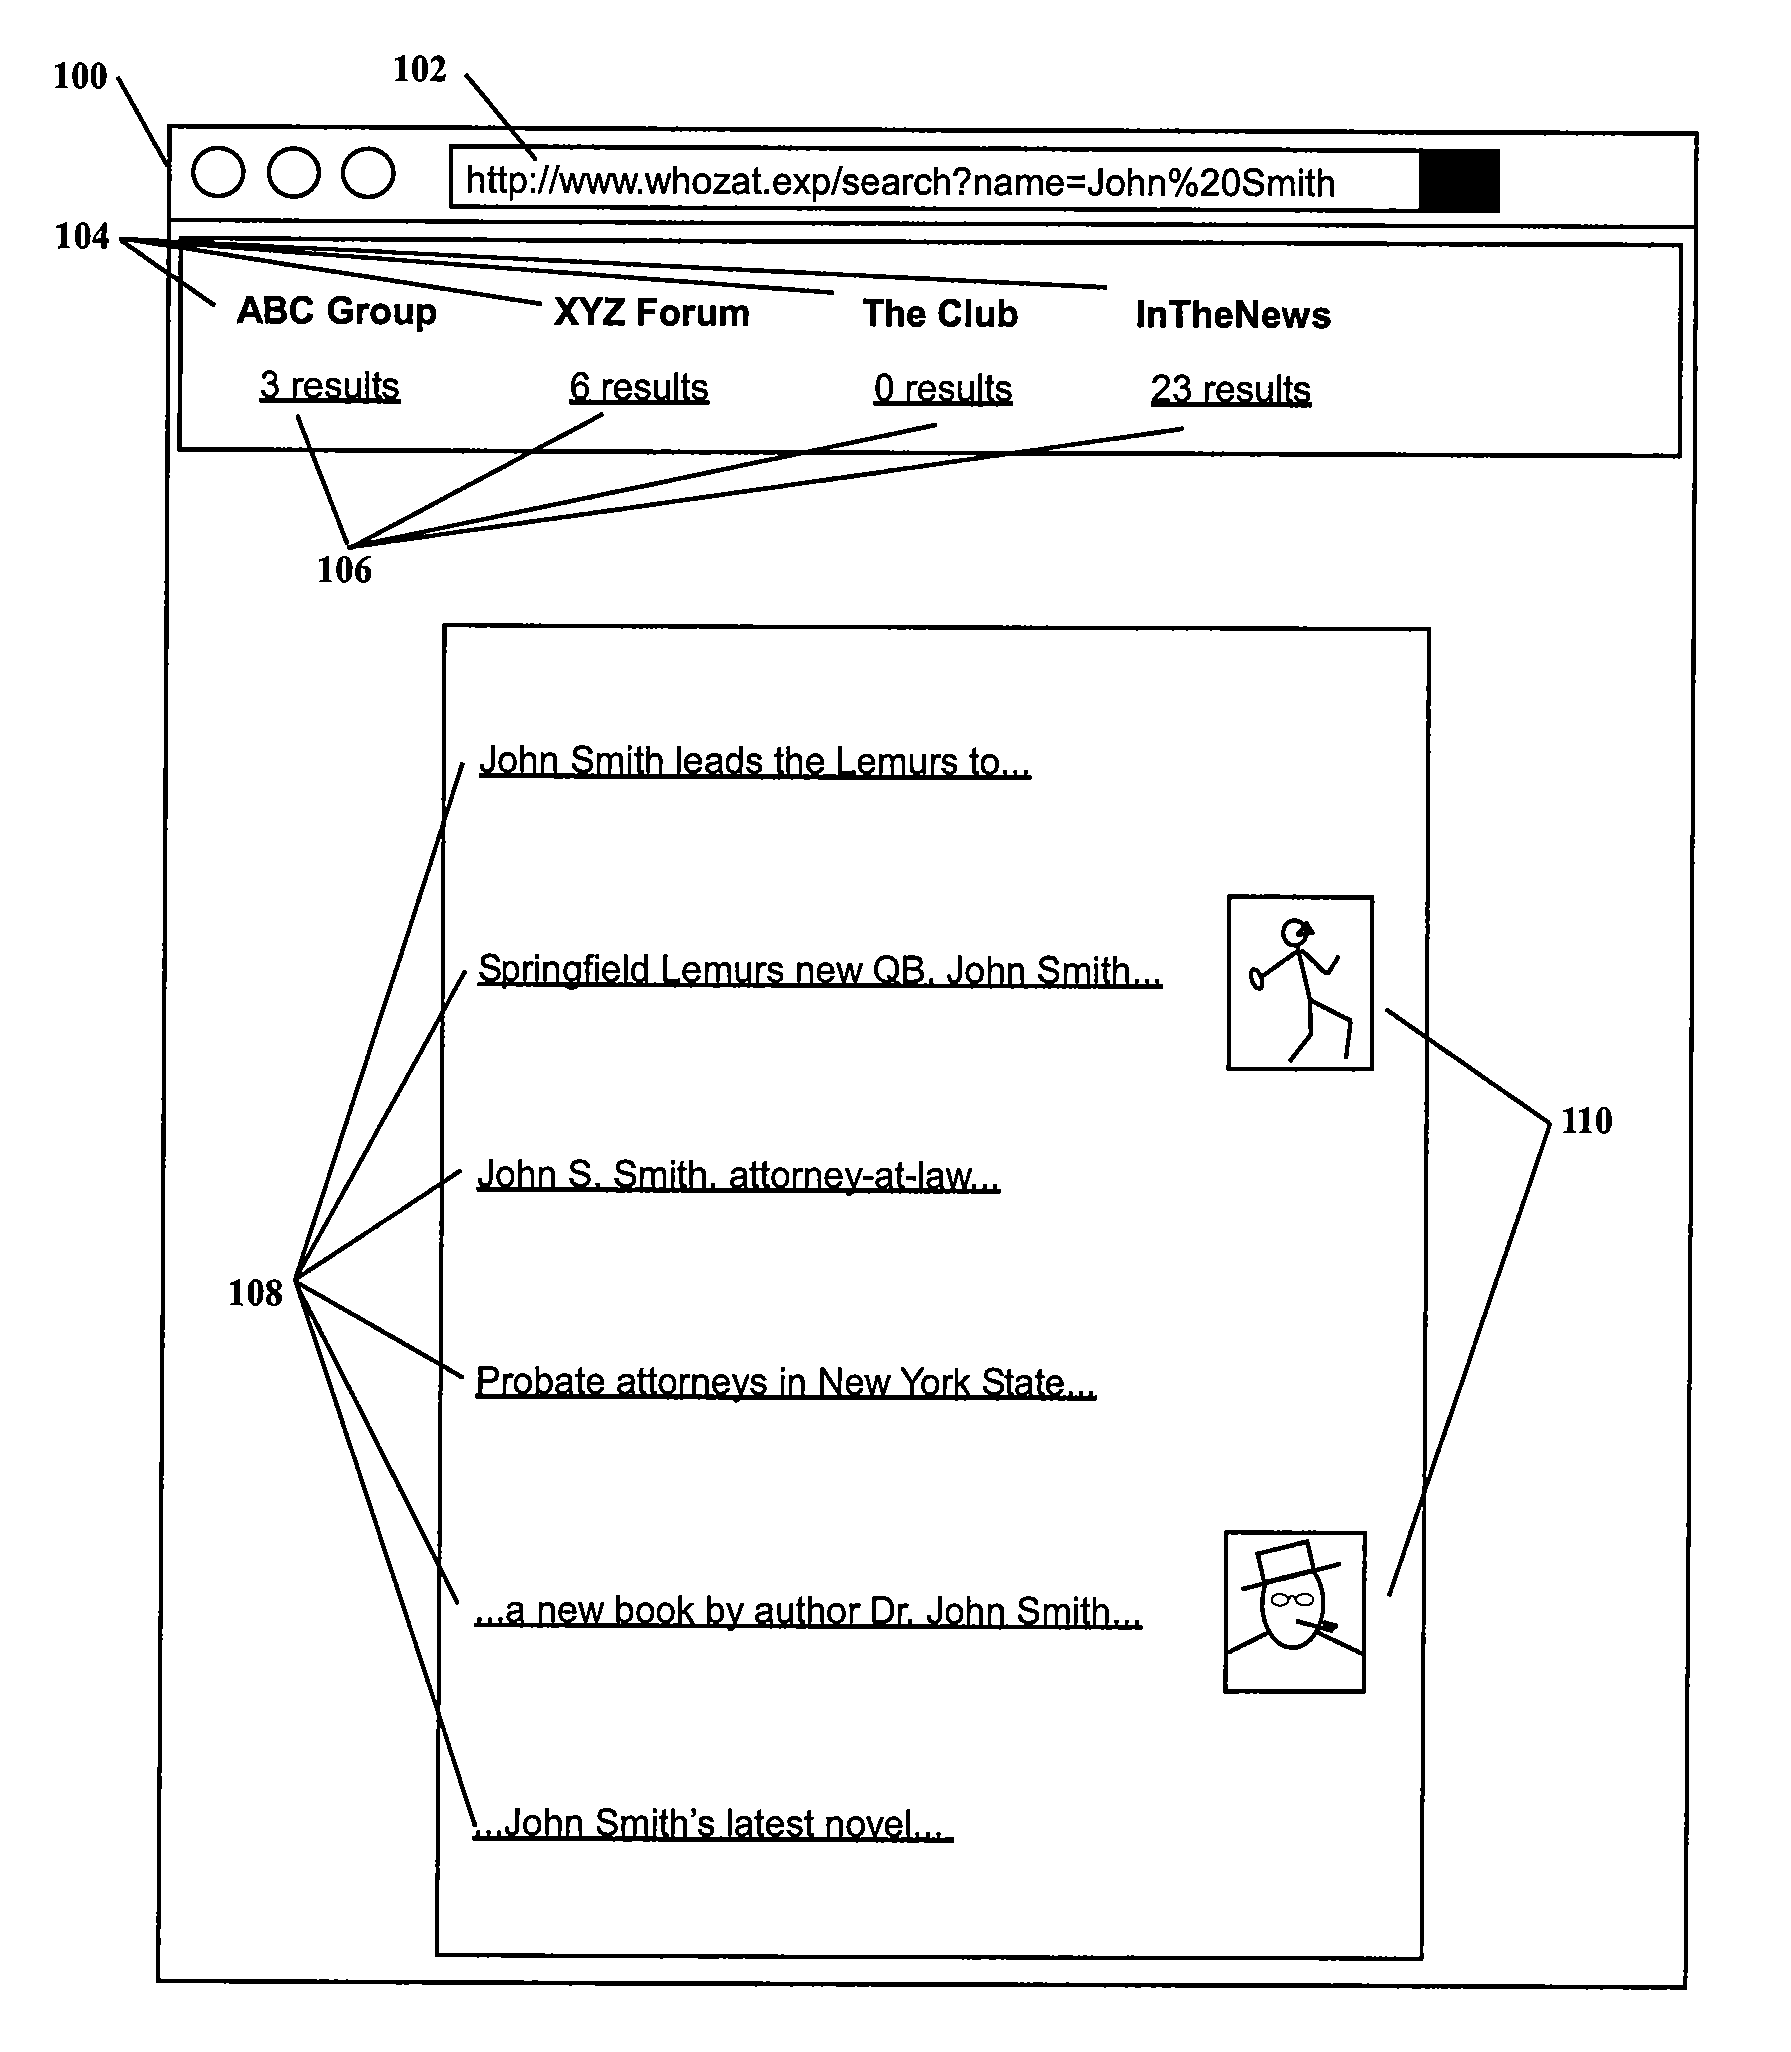 Method and system for displaying links to search results with corresponding images